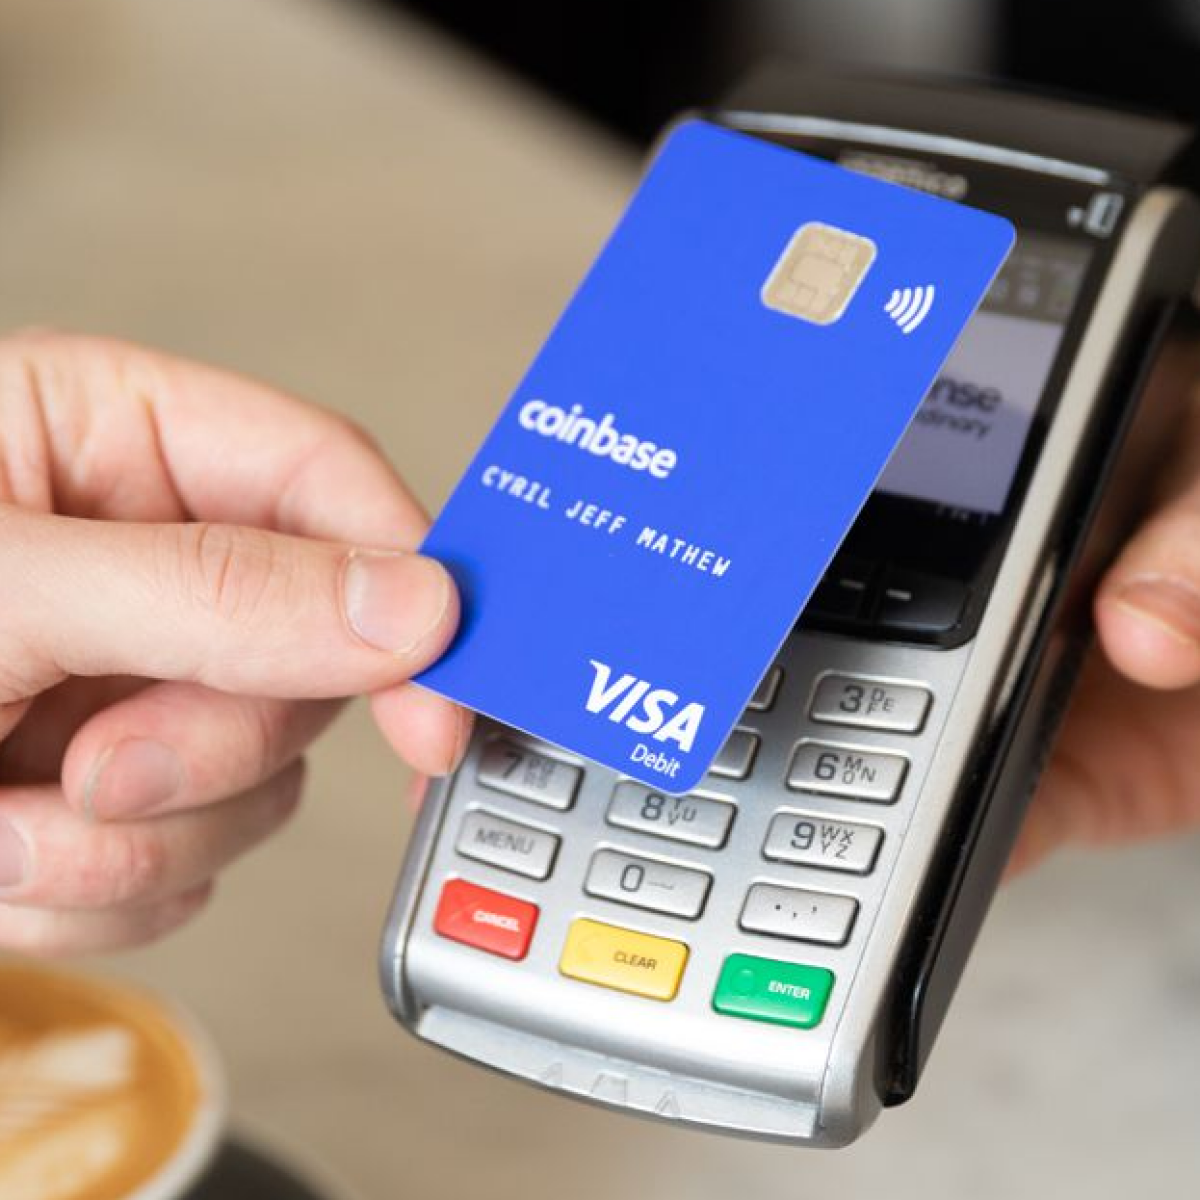 Coinbase Card Review Pros, Cons, Fees & Limits